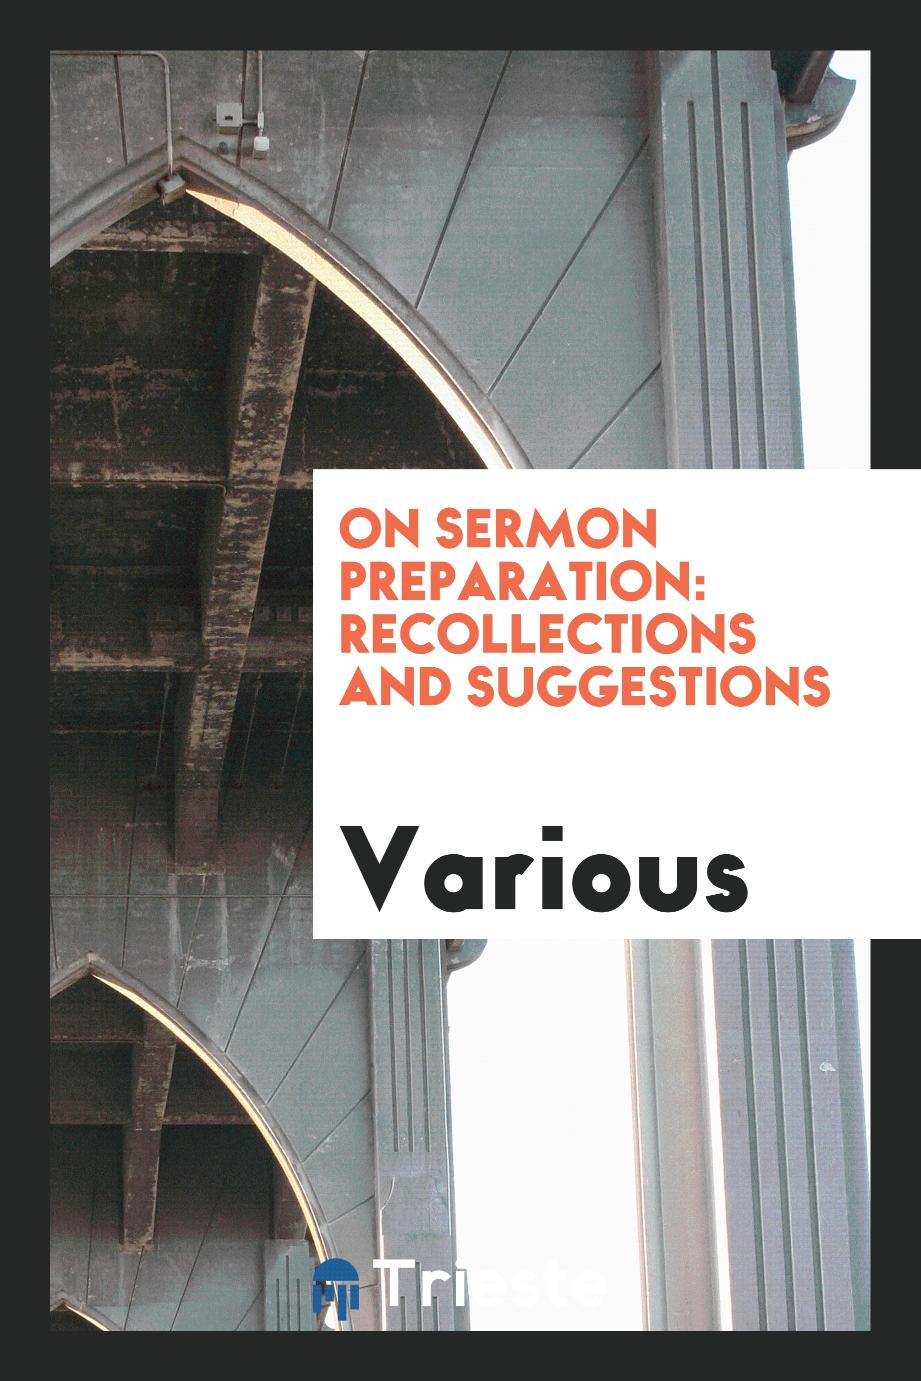 On sermon preparation: recollections and suggestions